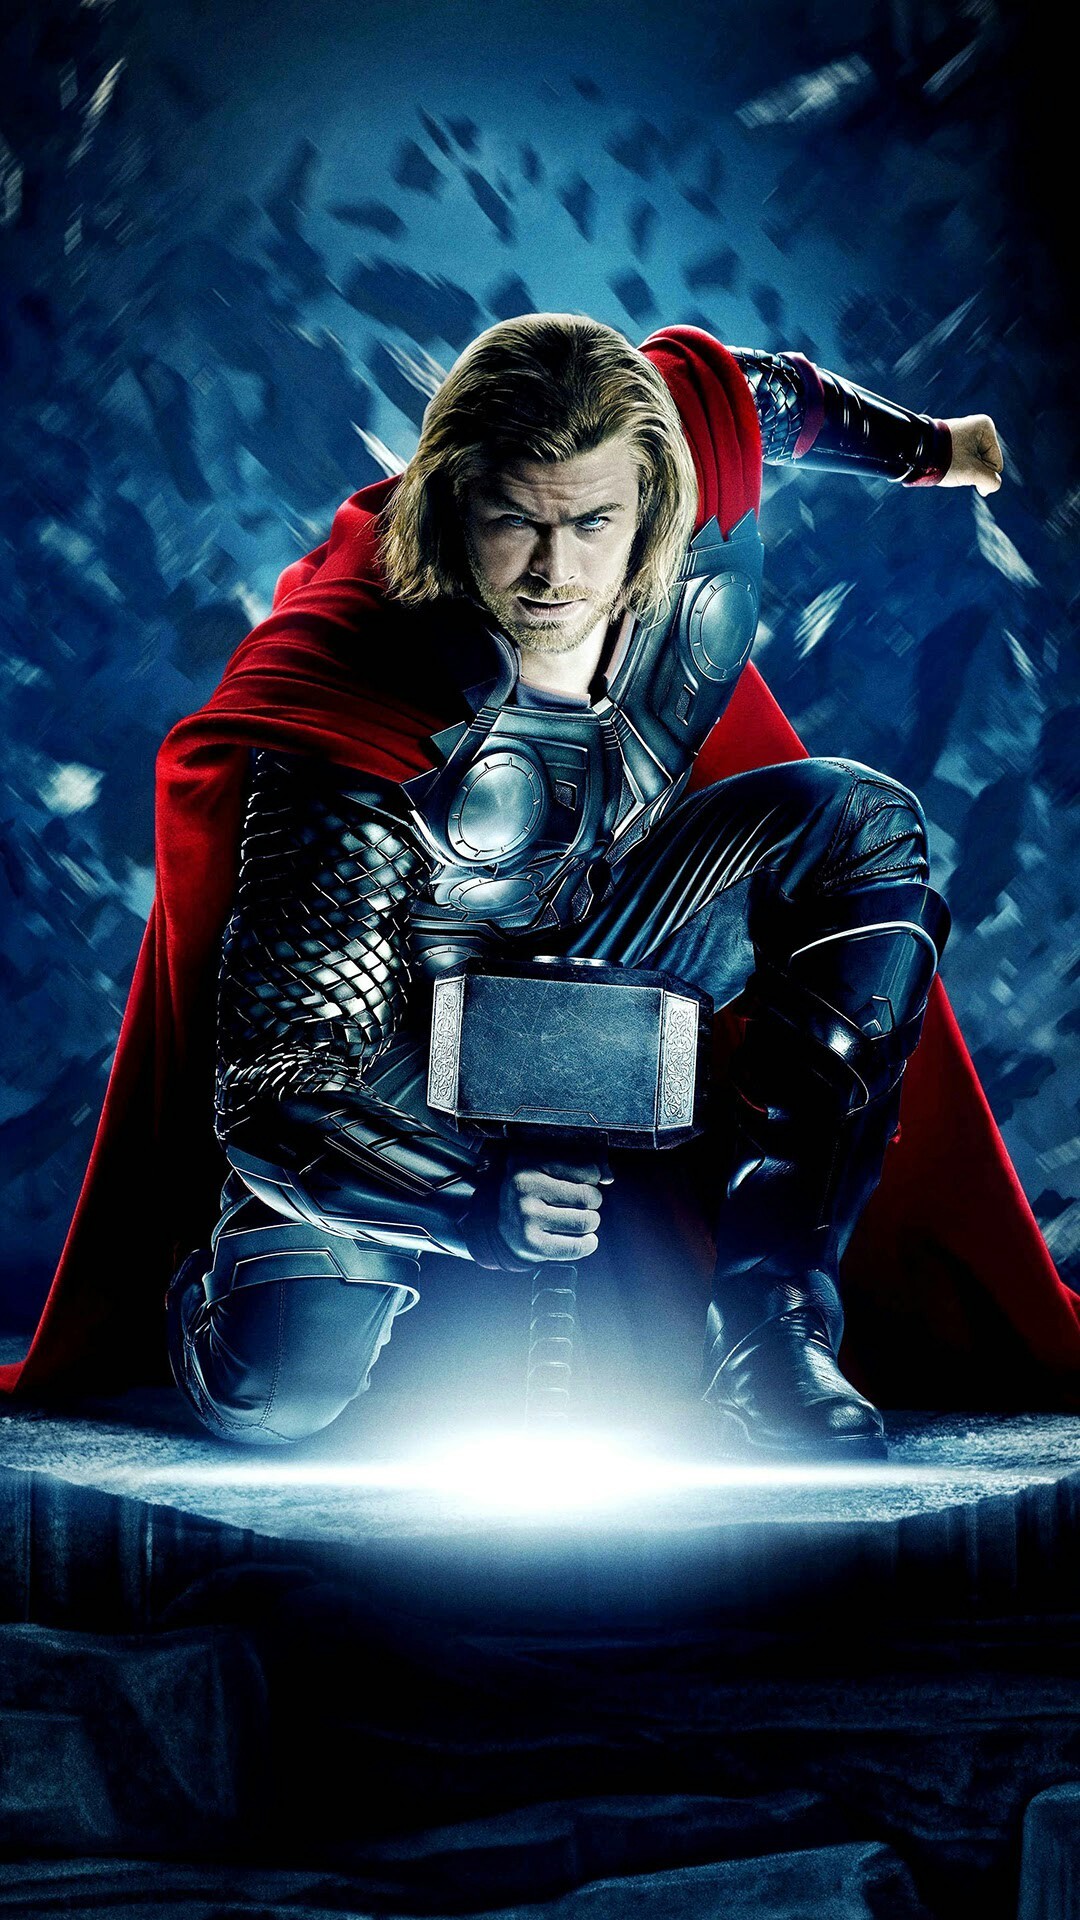 1080x1920 2424 x 2405 px HQ Definition Wallpaper Desktop thor picture by Becker  Gordon for: TWD